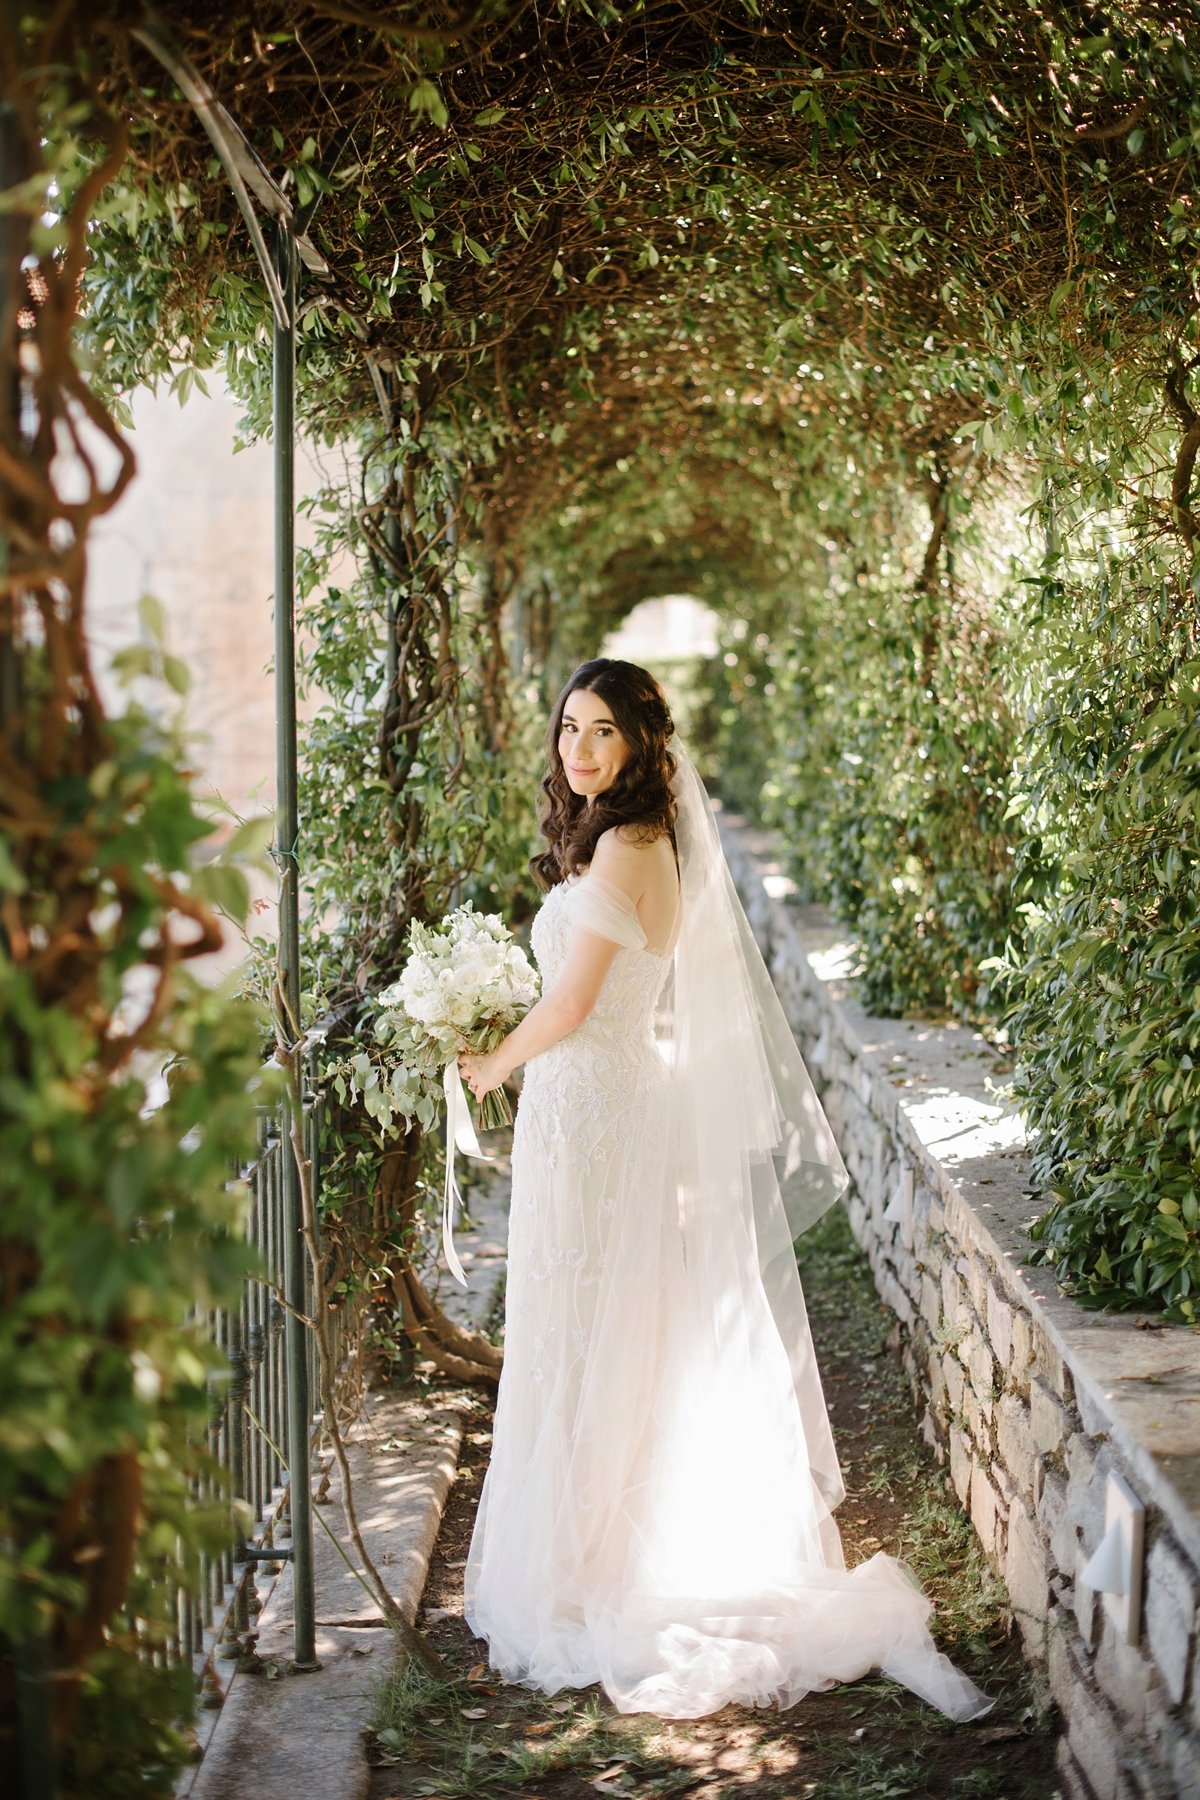 33 A Monique Lhuillier gown for a romantic summer villa wedding on Lake Como in Italy